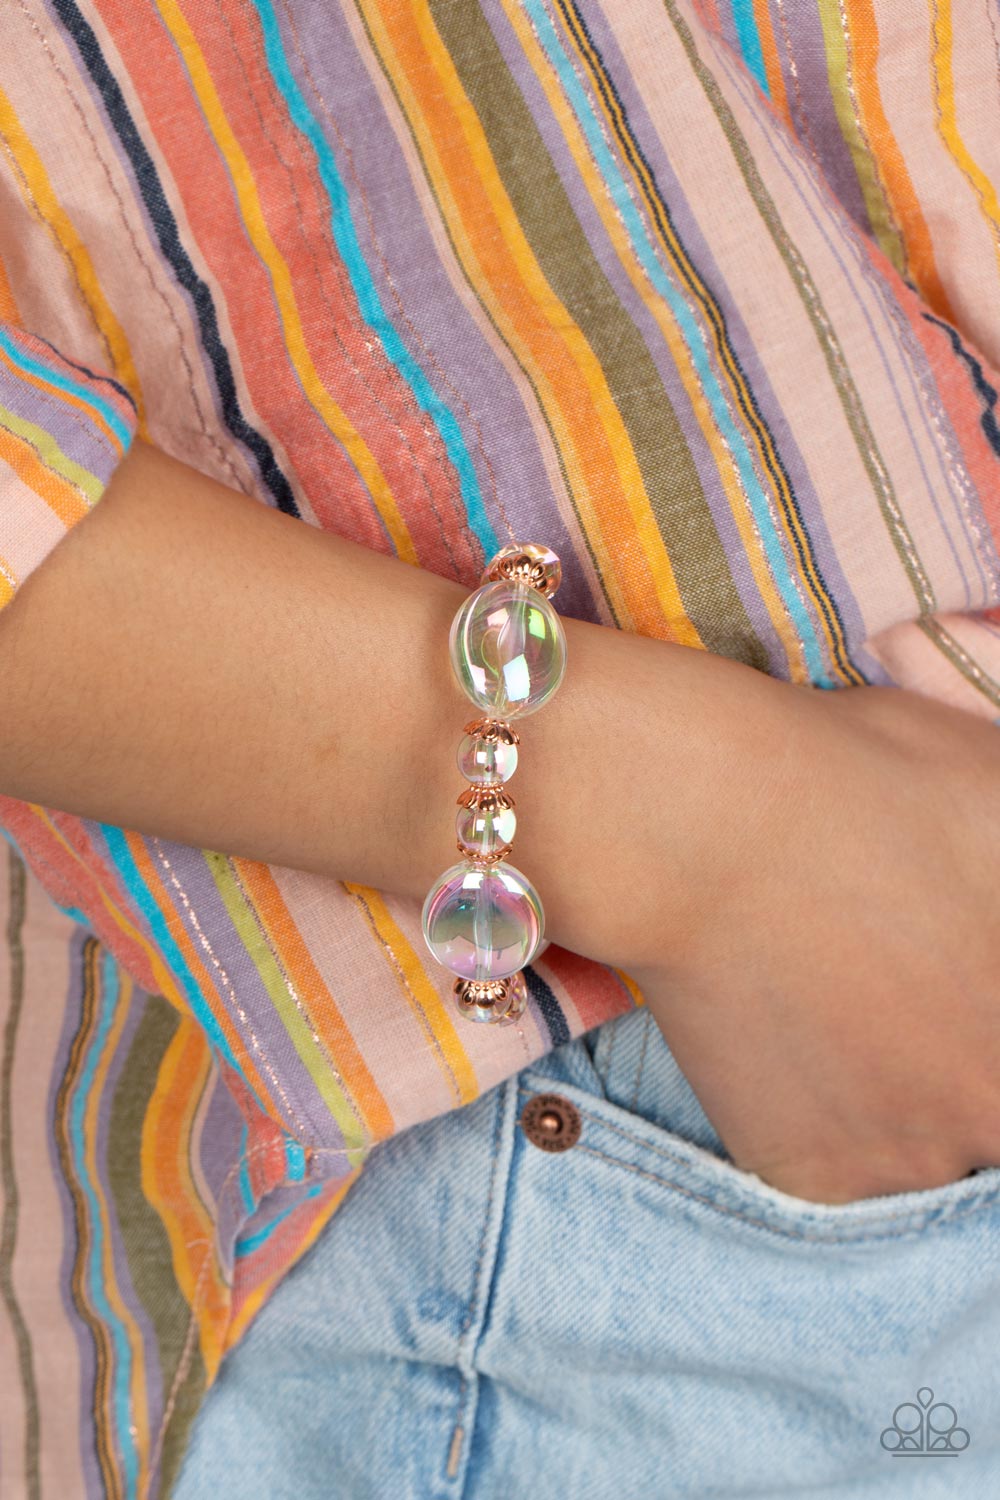 Paparazzi Accessories Iridescent Illusions - Copper Bubbly iridescent beads in varying sizes are threaded along a stretchy band, creating a glittery magical effect around the wrist. Shiny copper cap fittings encase the smaller beads, adding vintage metall